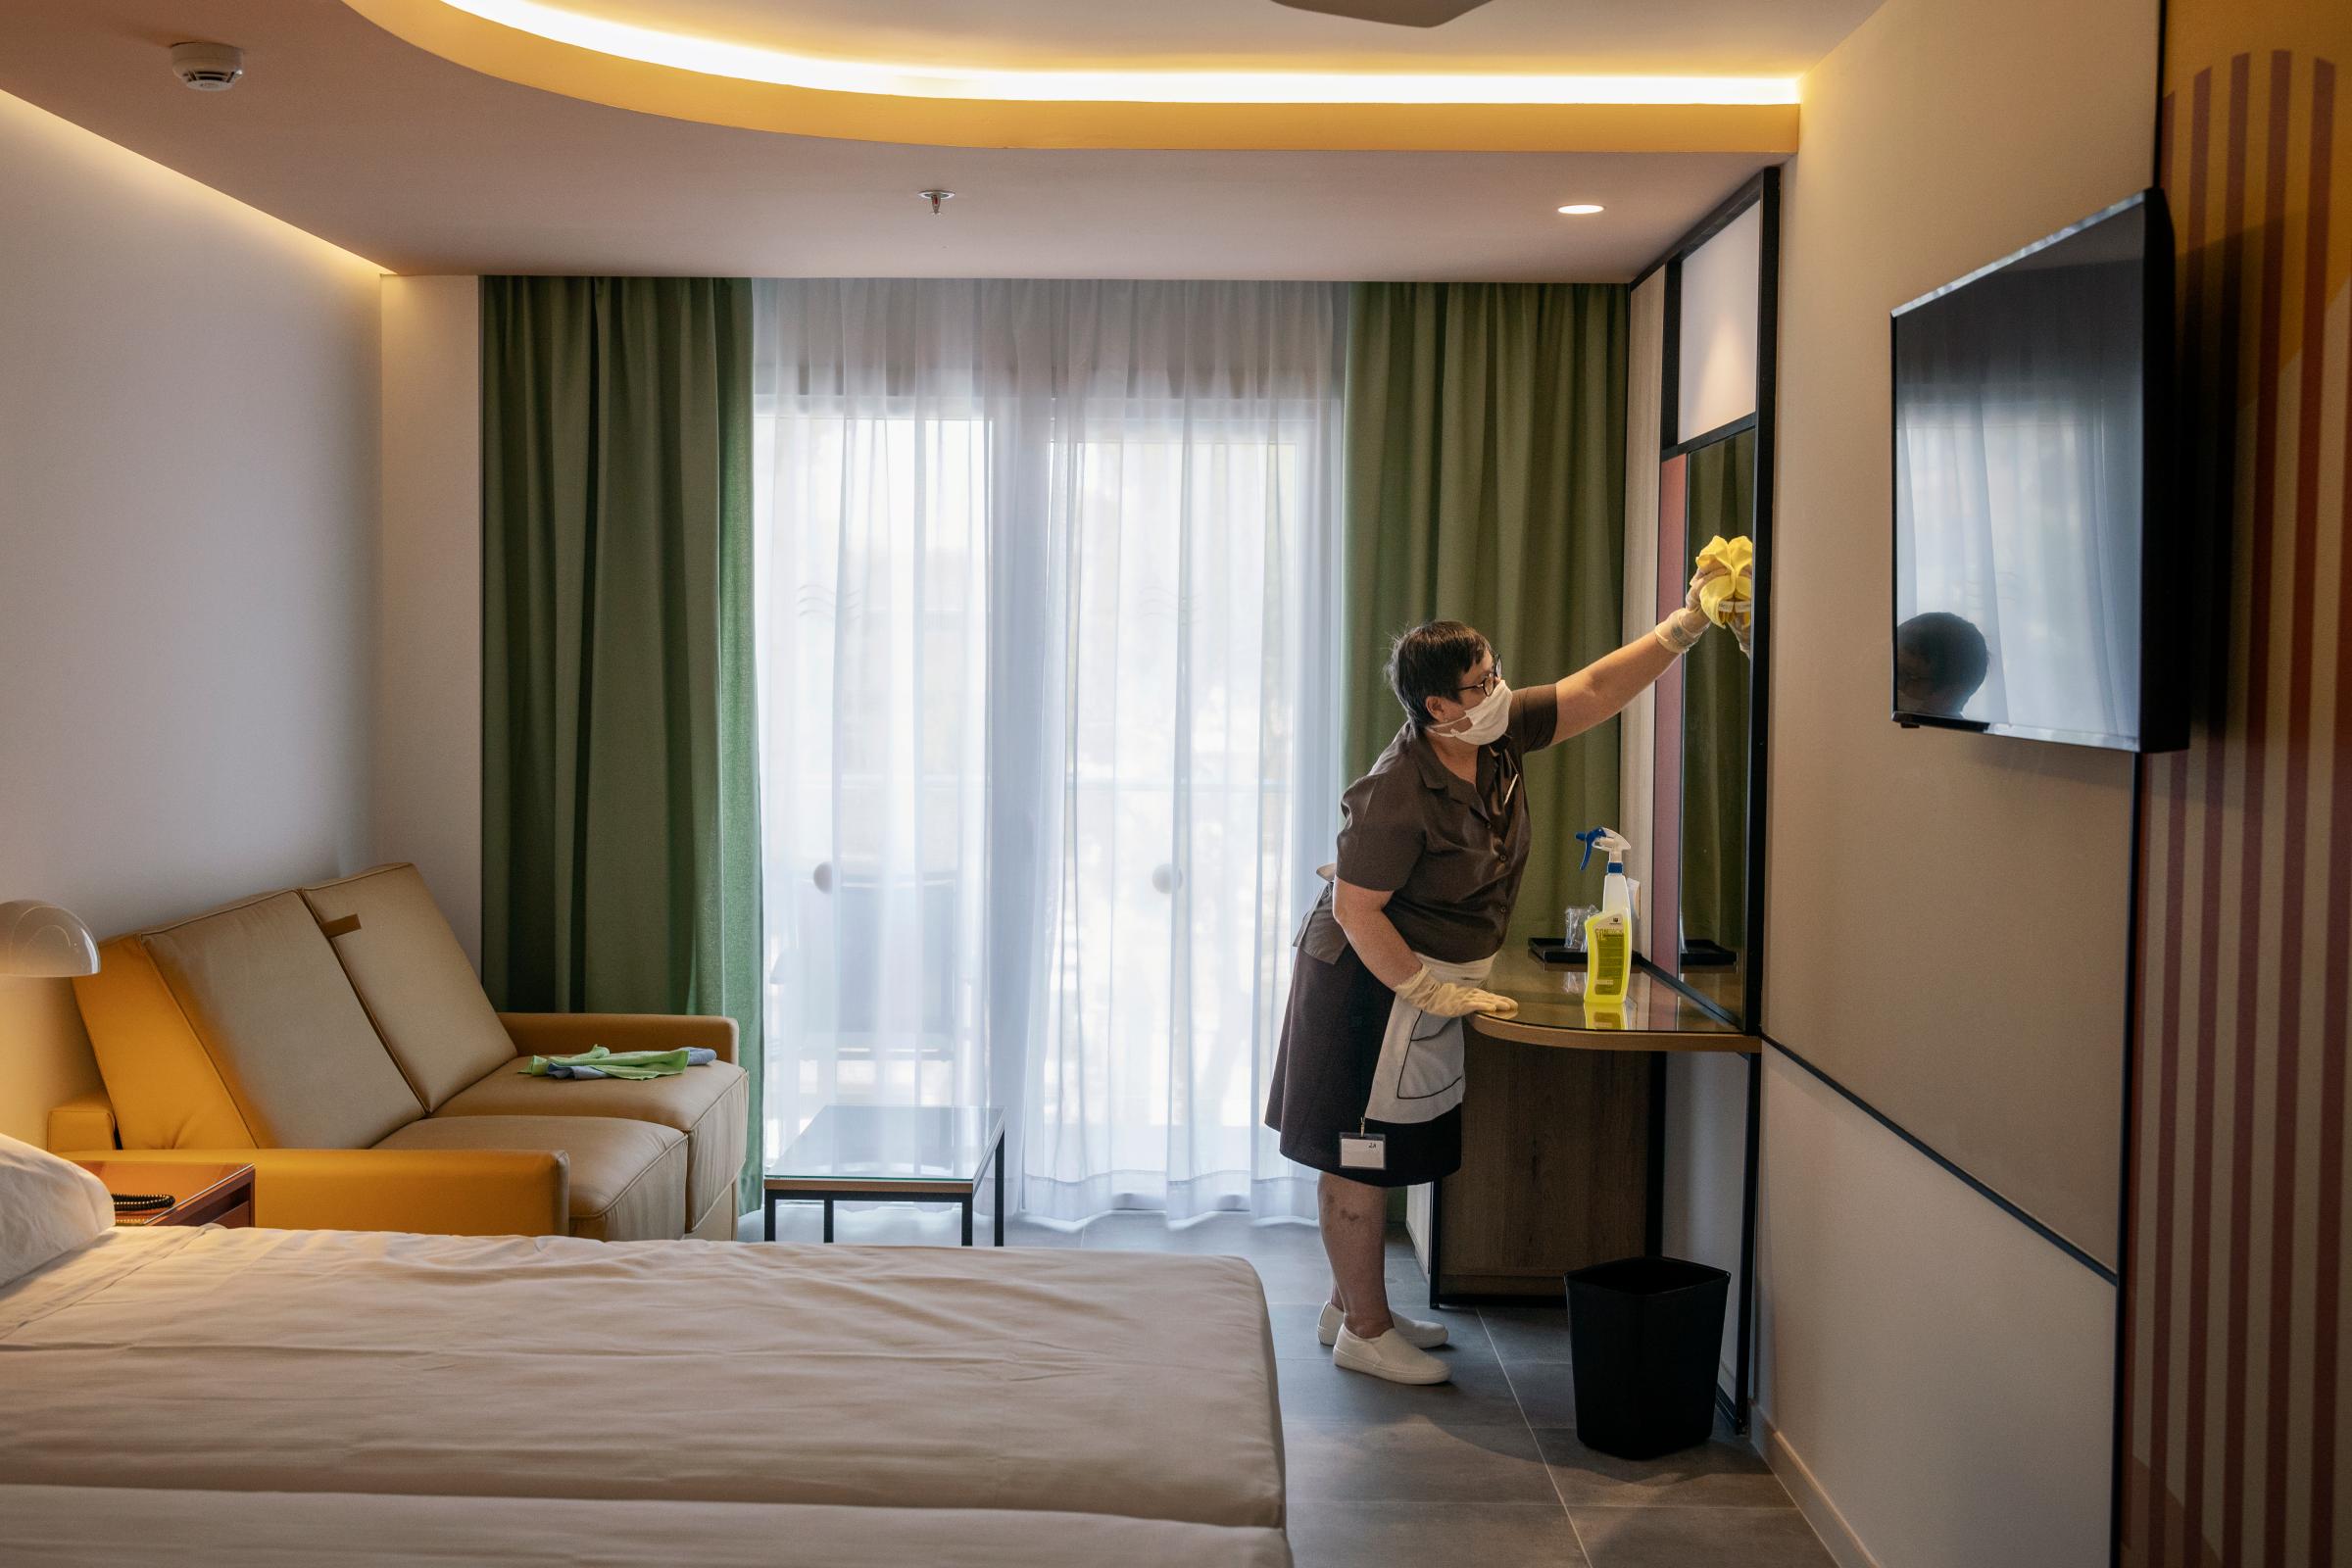 Playa de Palma, Mallorca, a member of the Riu Concordia Hotel staff at work cleaning and disinfecting a room.